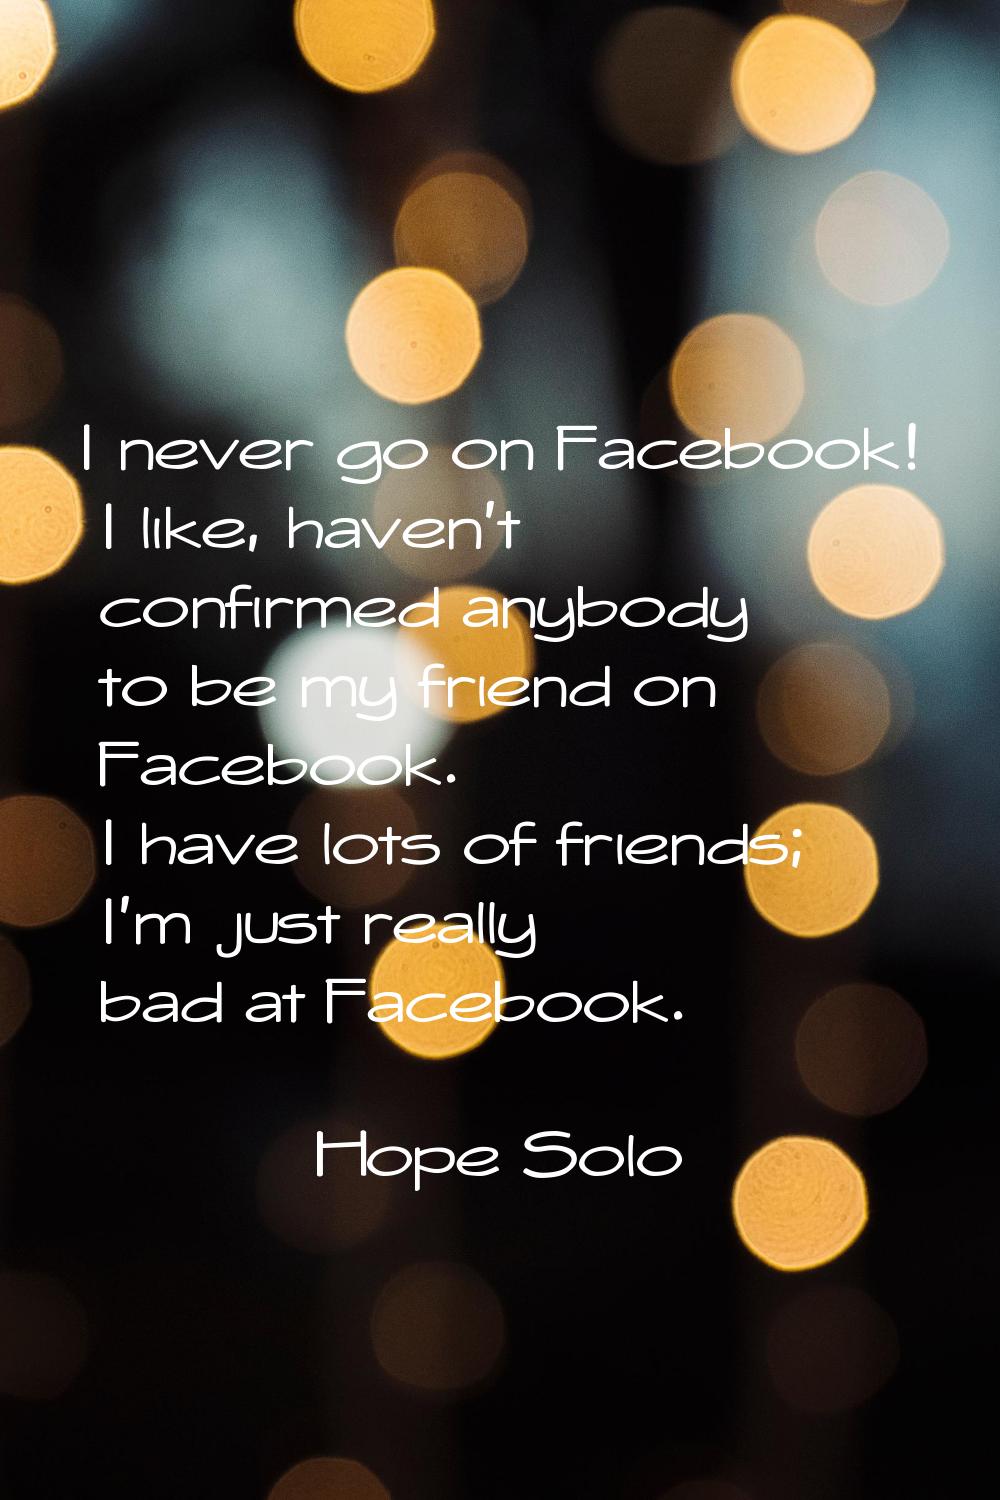 I never go on Facebook! I like, haven't confirmed anybody to be my friend on Facebook. I have lots 